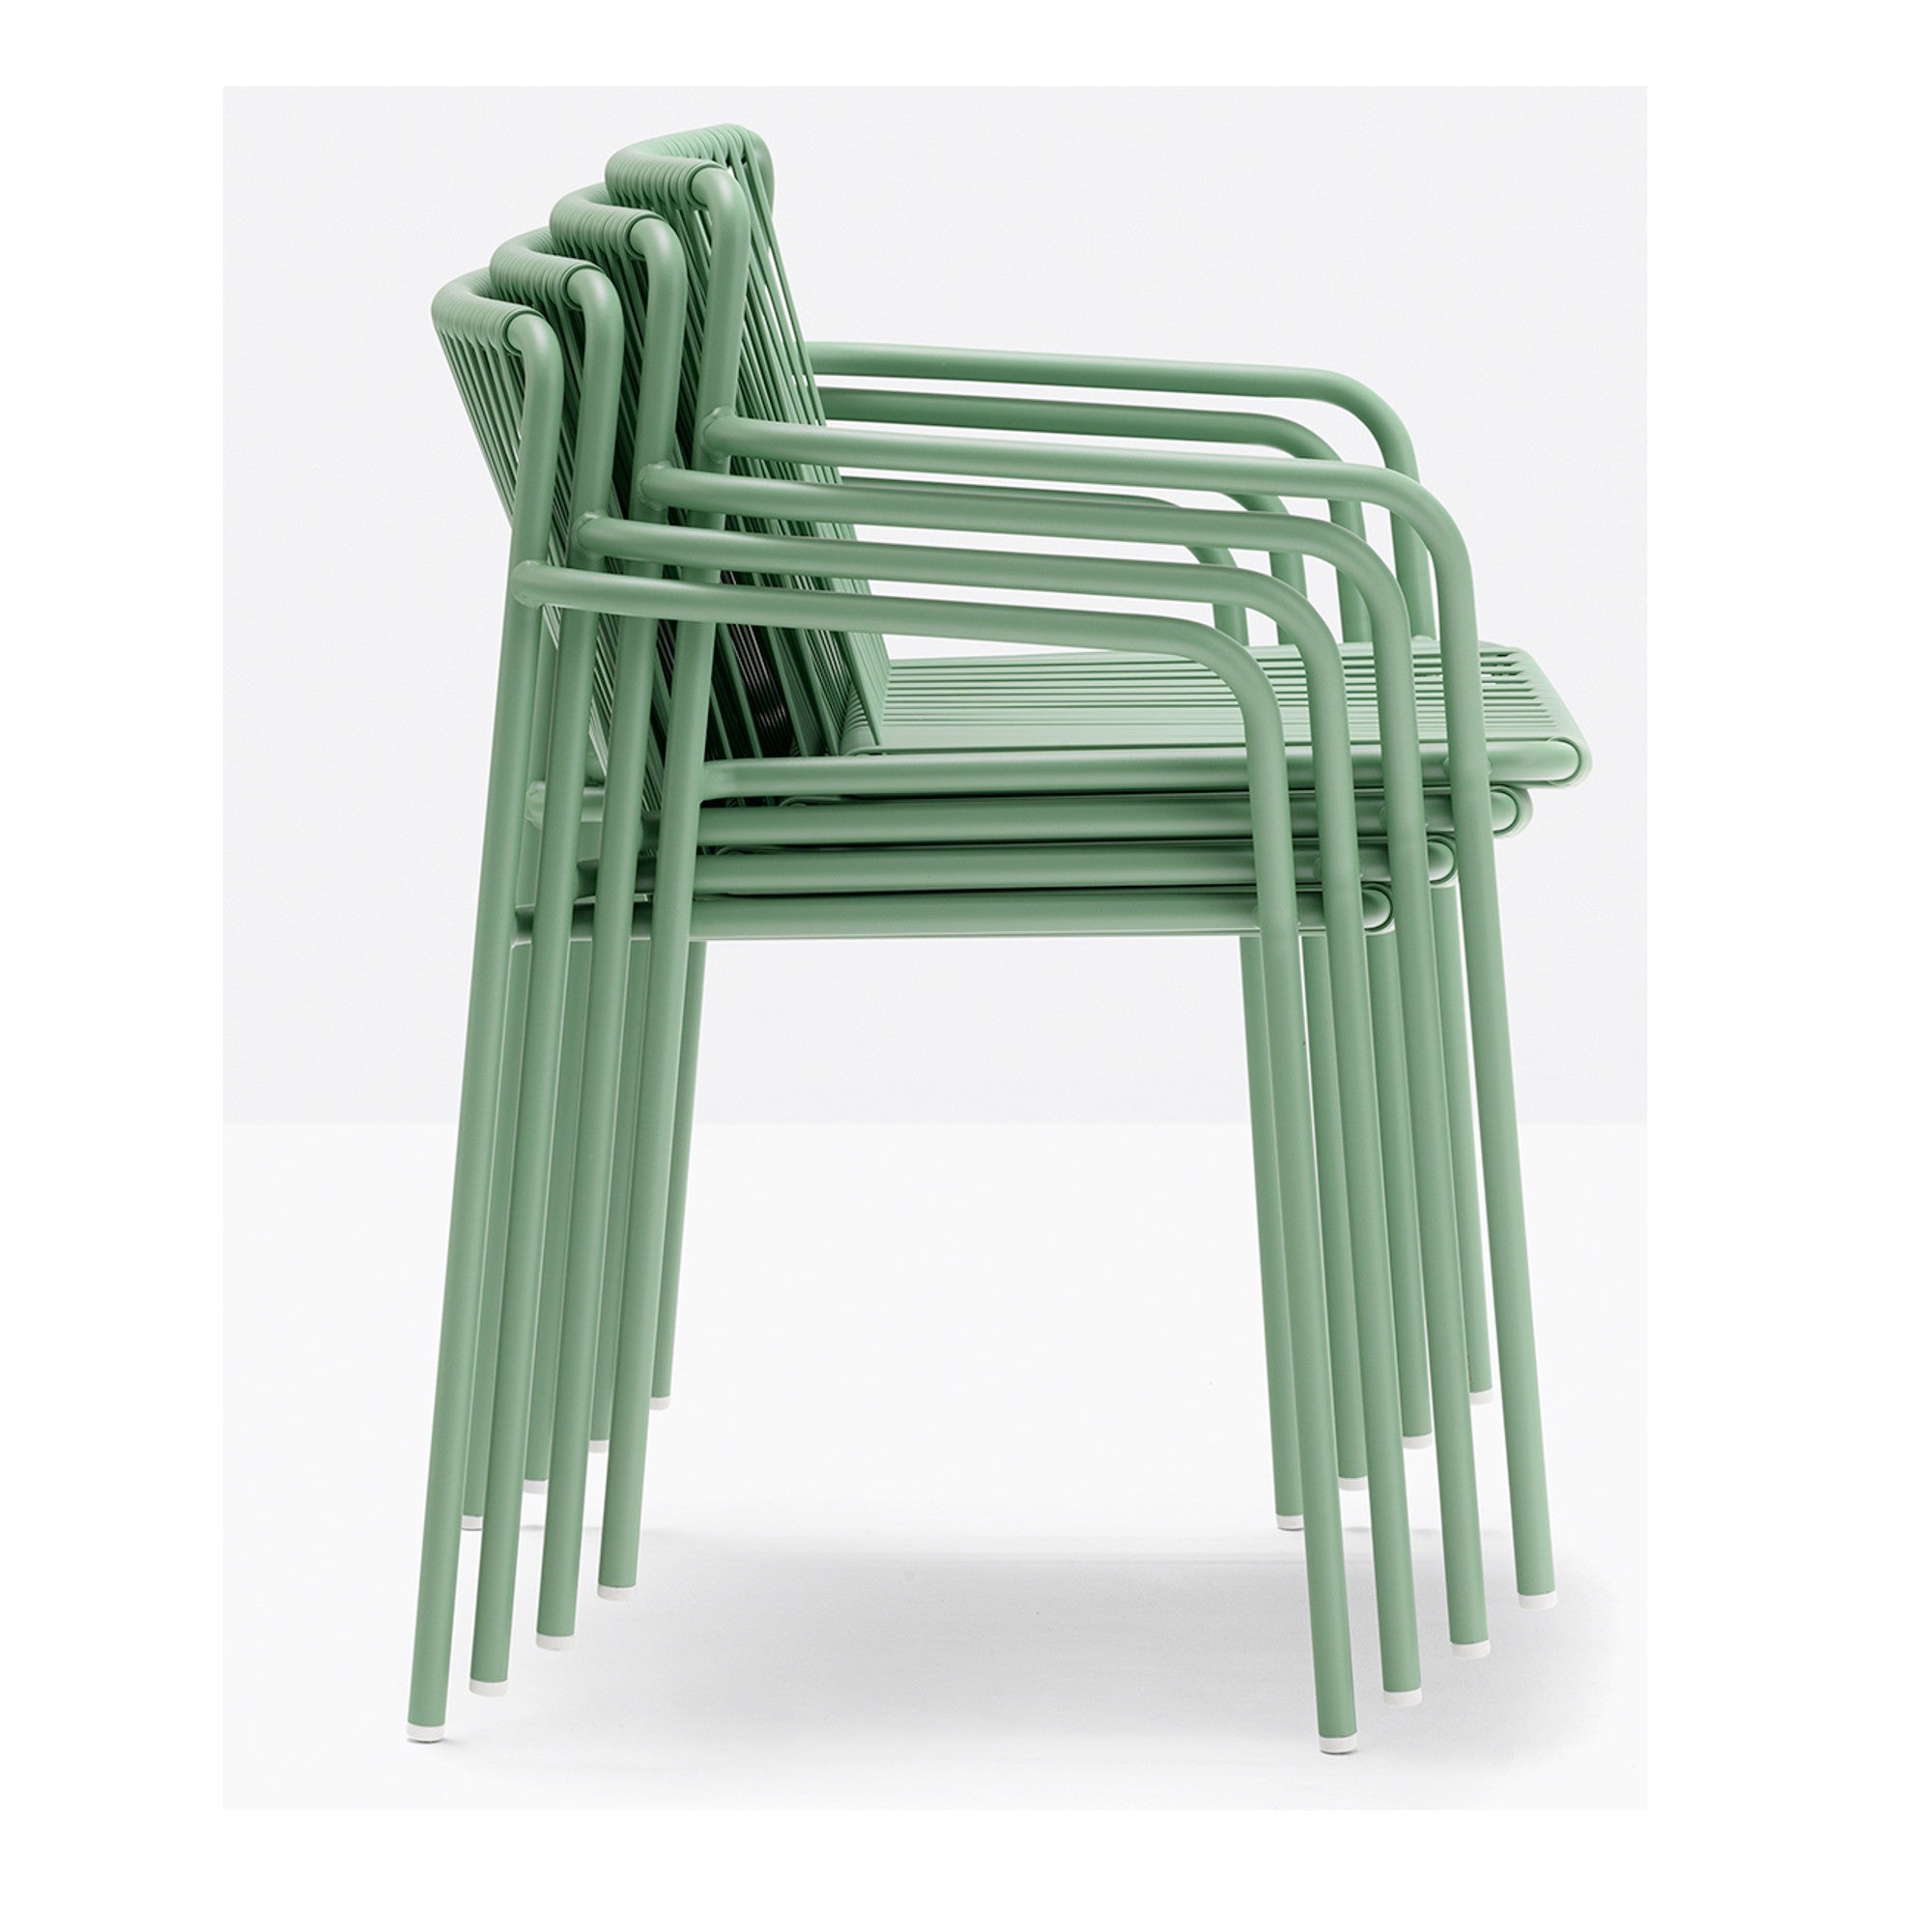 Pedrali Tribeca 3665 Outdoor Chair